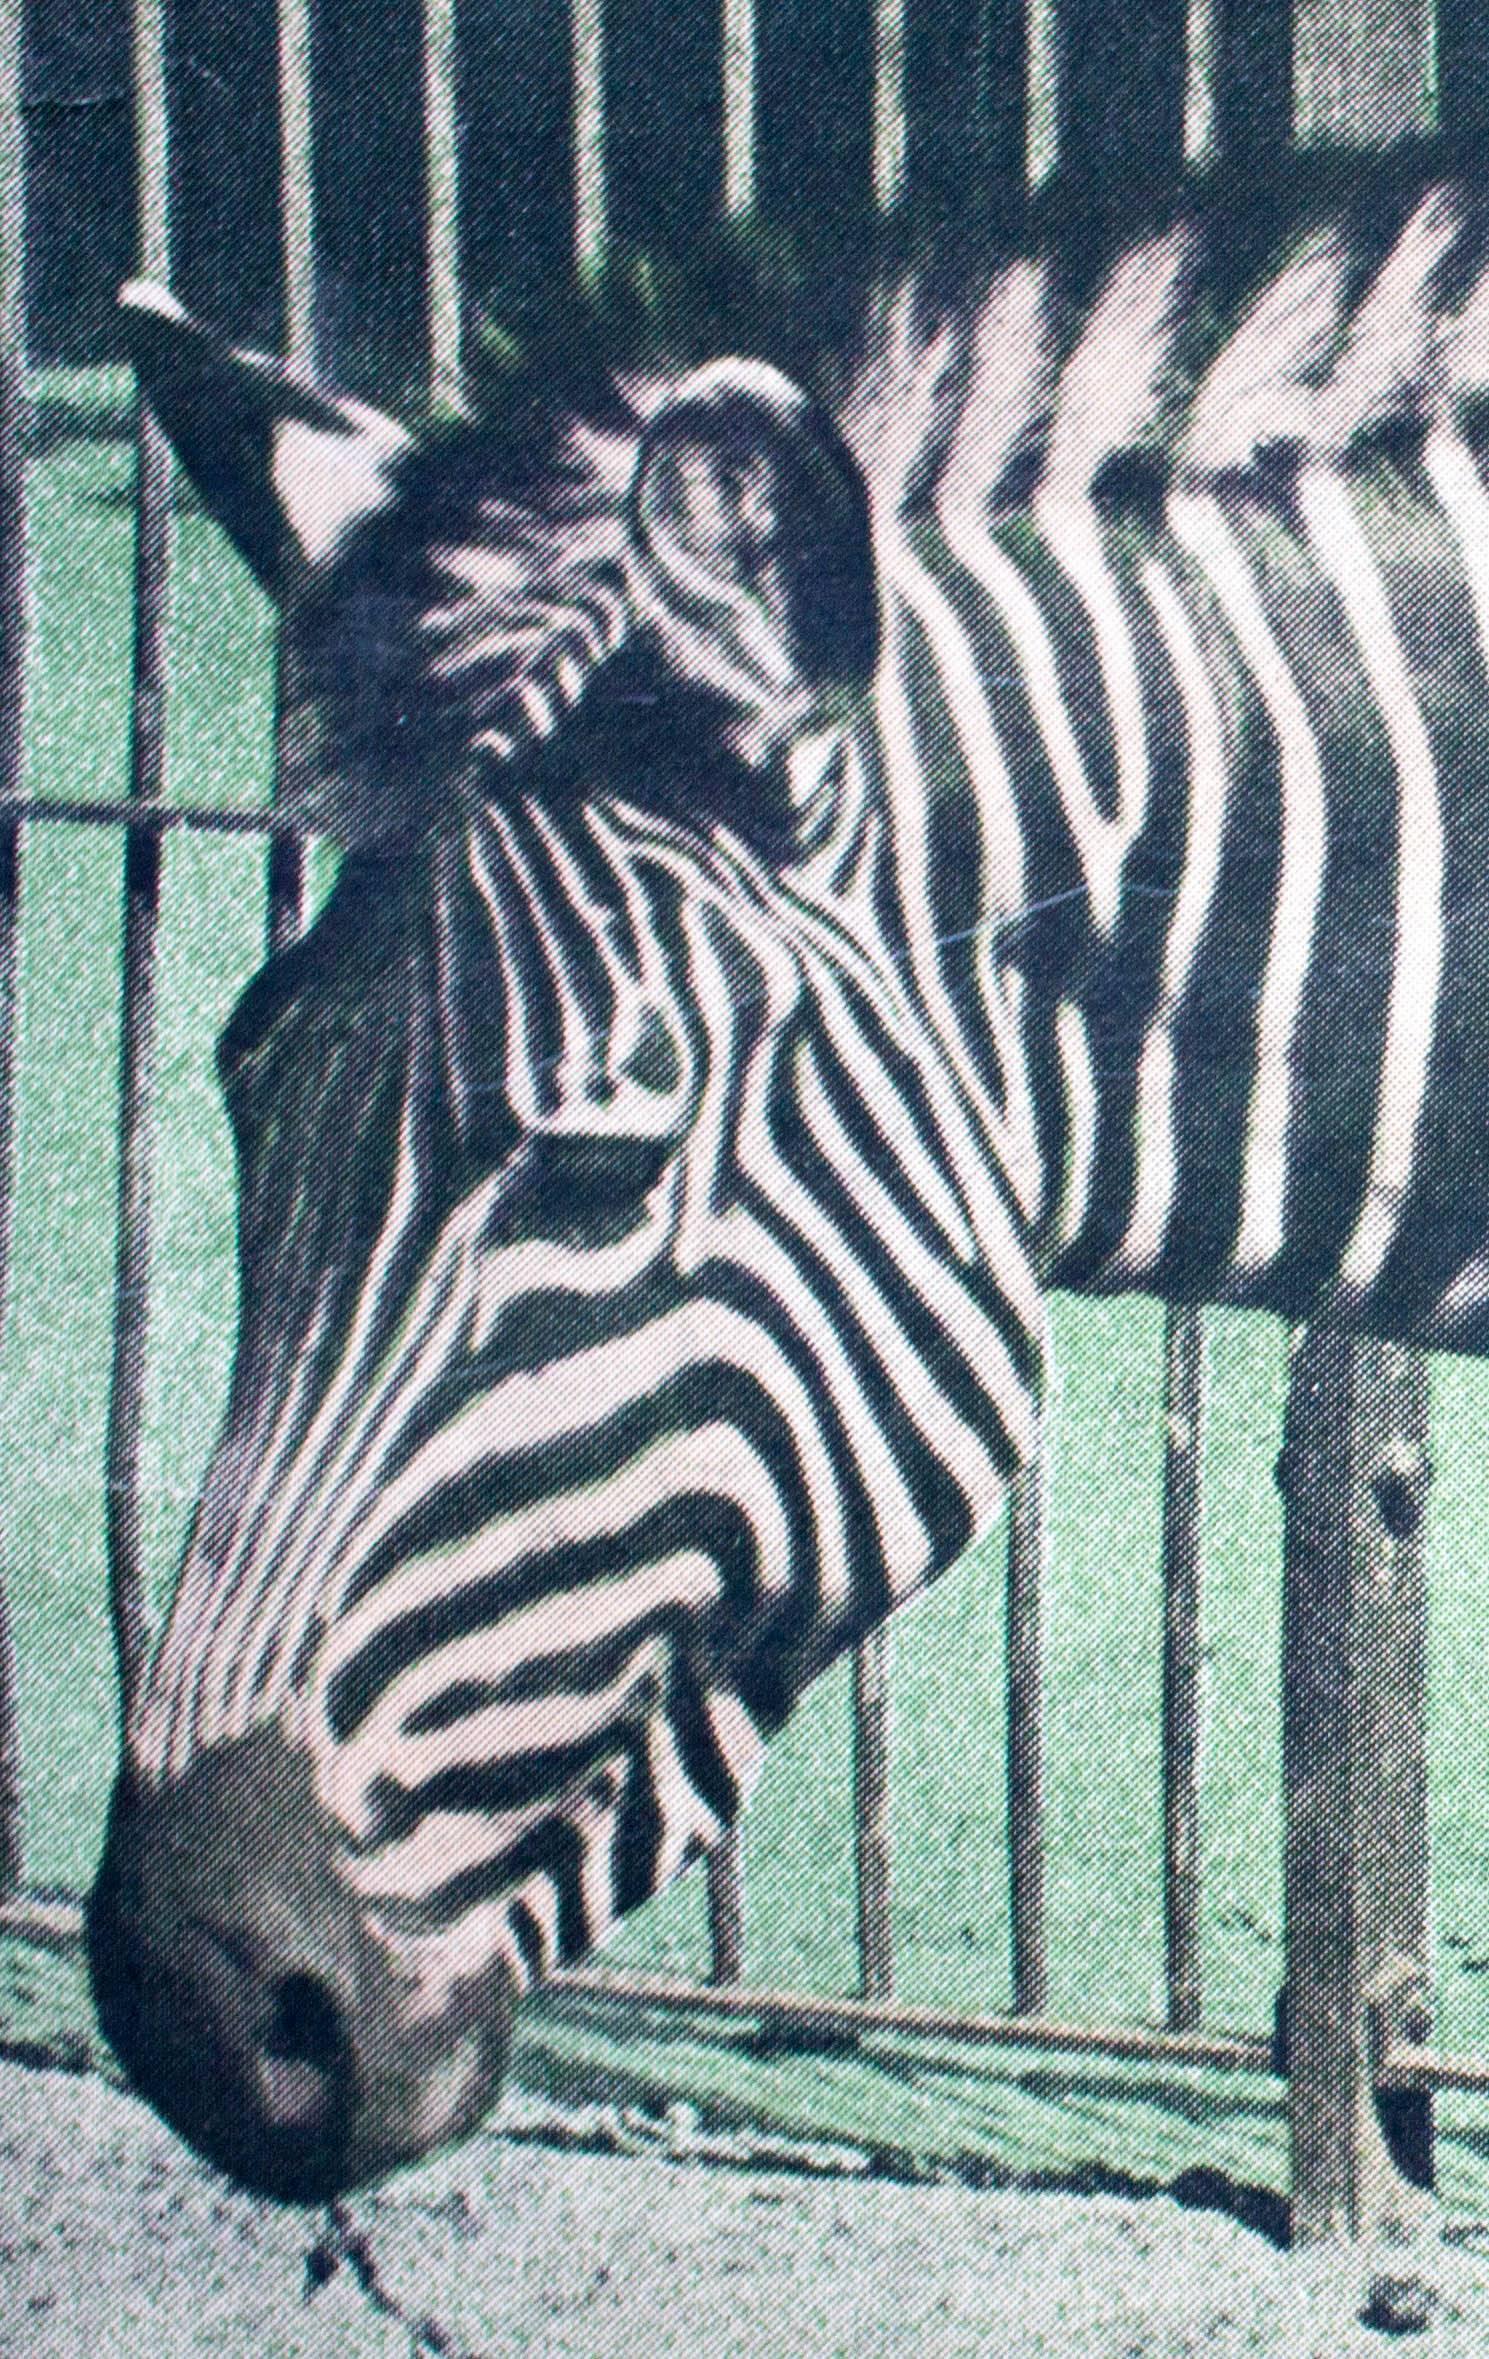 This educational wall chart from the Schönbrunn series depicts a zebra and is a photolithography produced by the K.k. Hof- und Staatsdruckerei in Vienna. This piece originates from 1916 and is printed on photo paper that has been stuck on to paper.